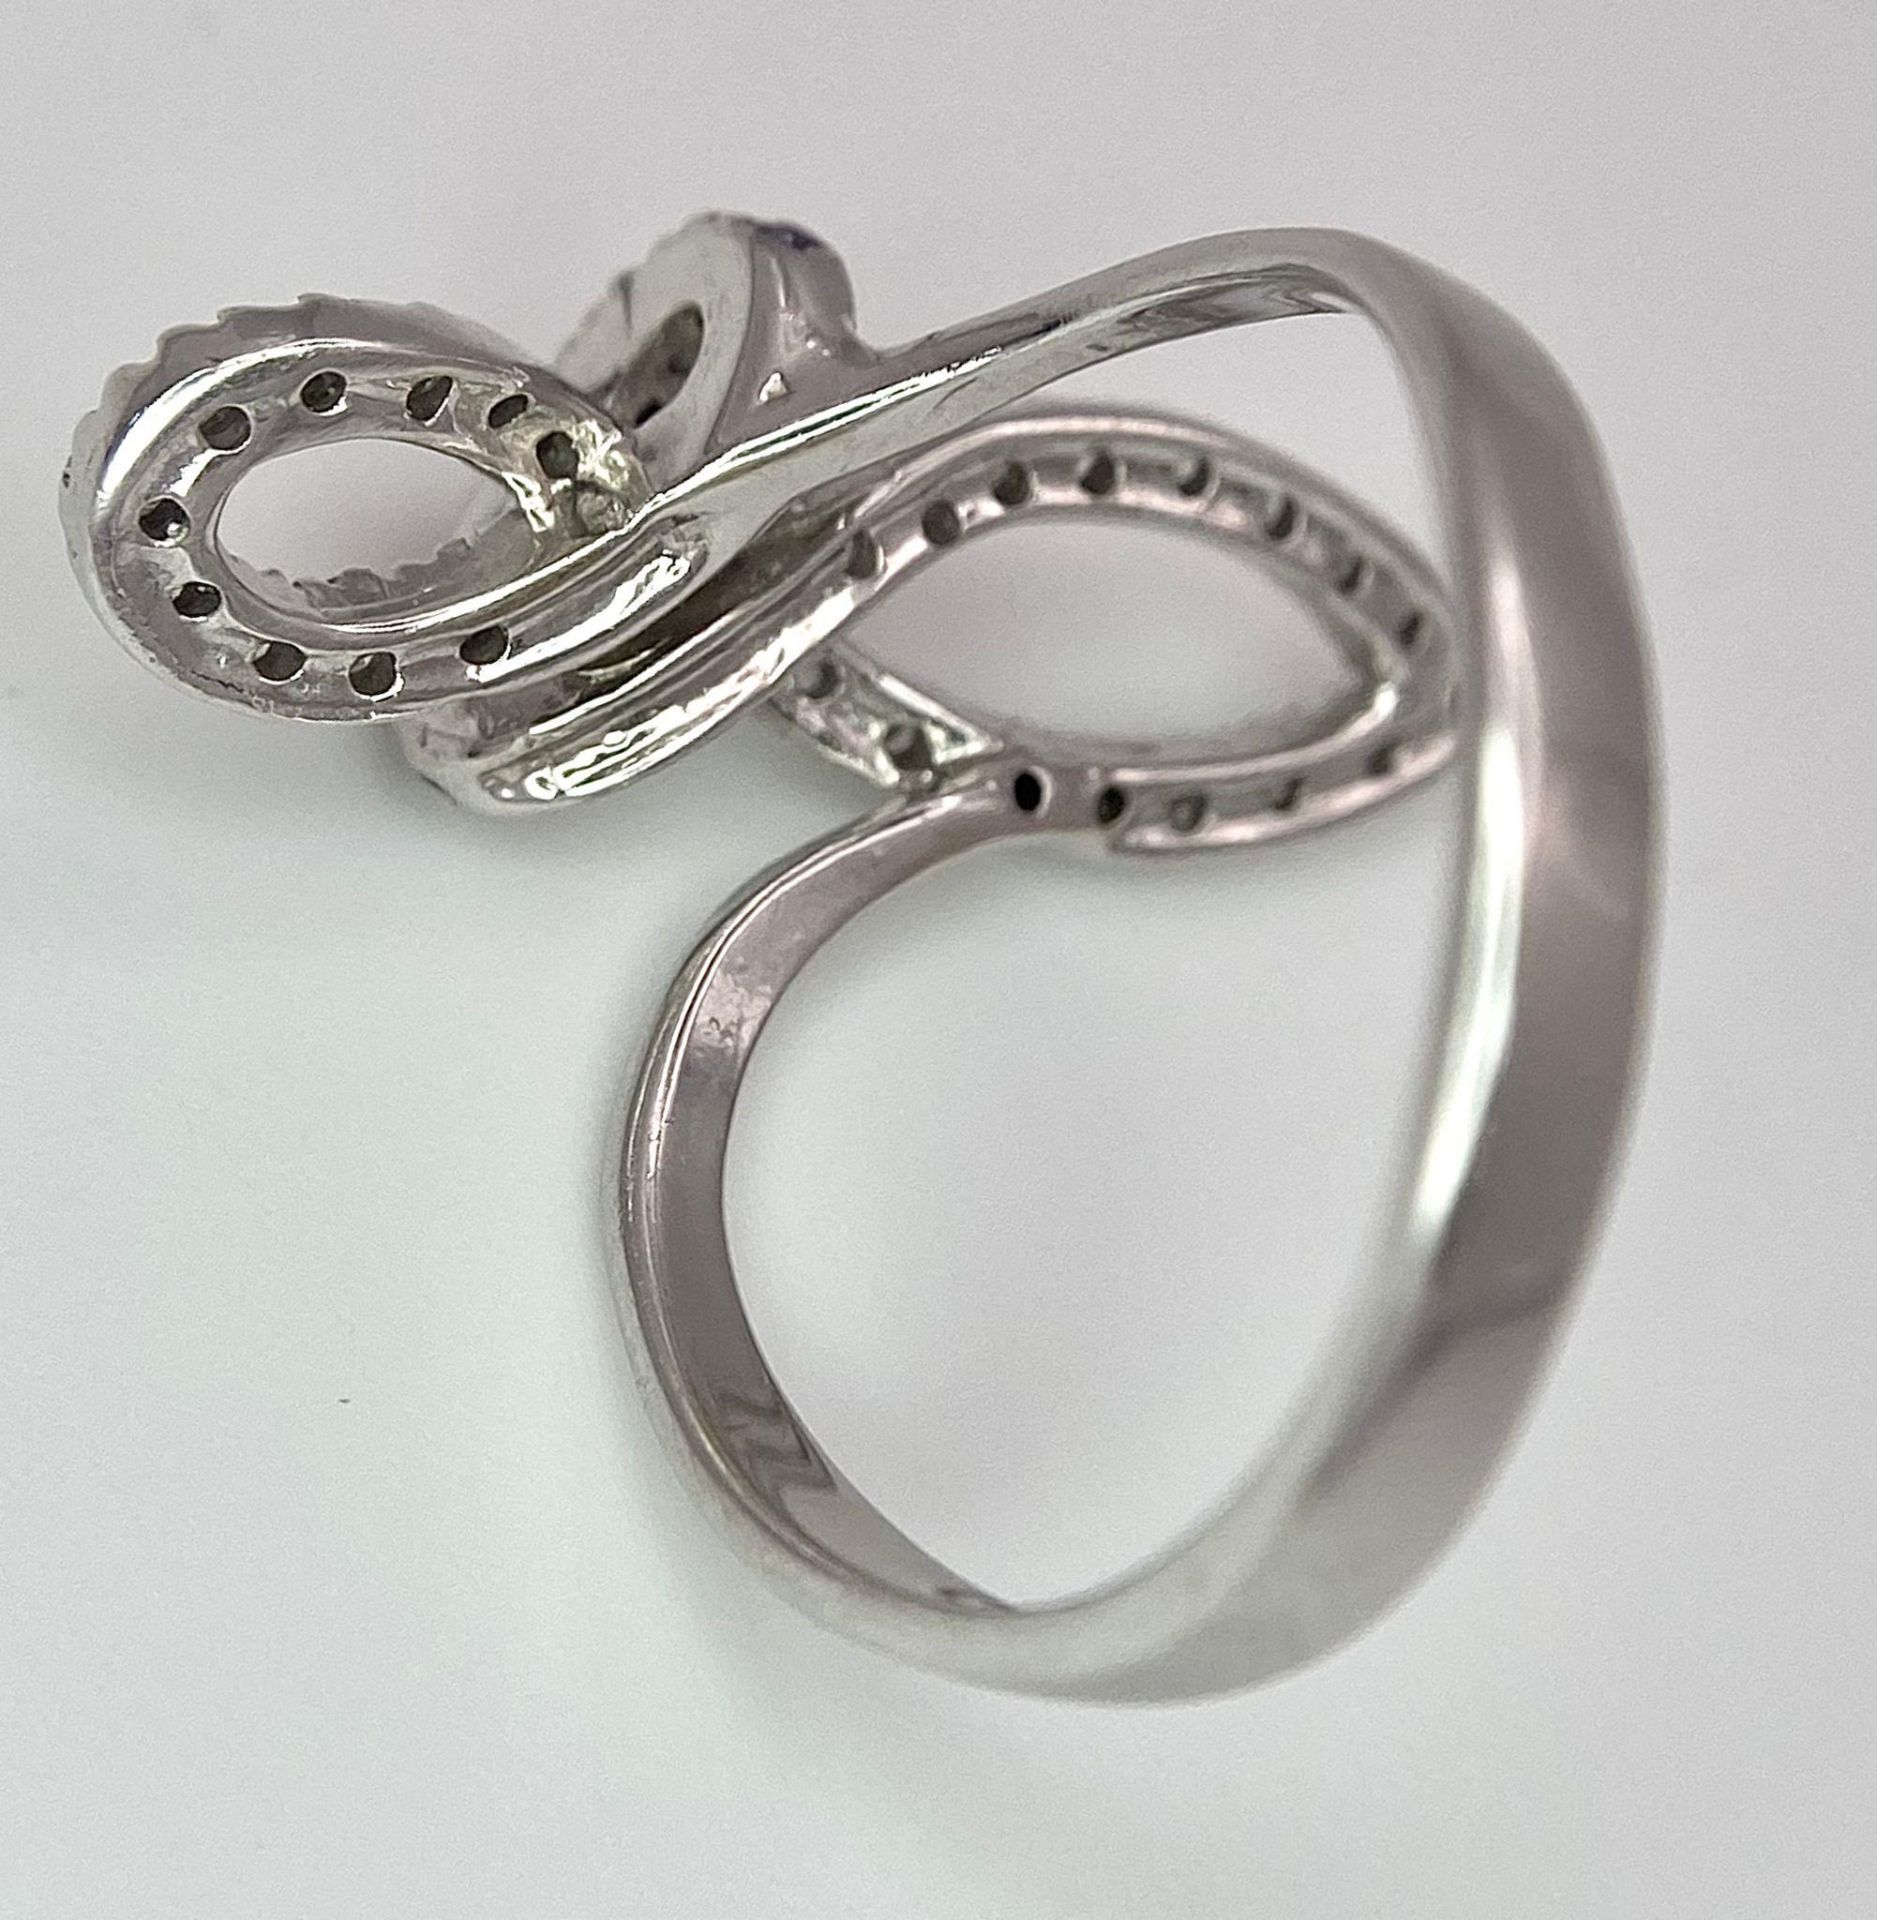 An 18K White Gold CZ Fancy Knot Ring. Size O. 3.9g weight. - Image 6 of 7